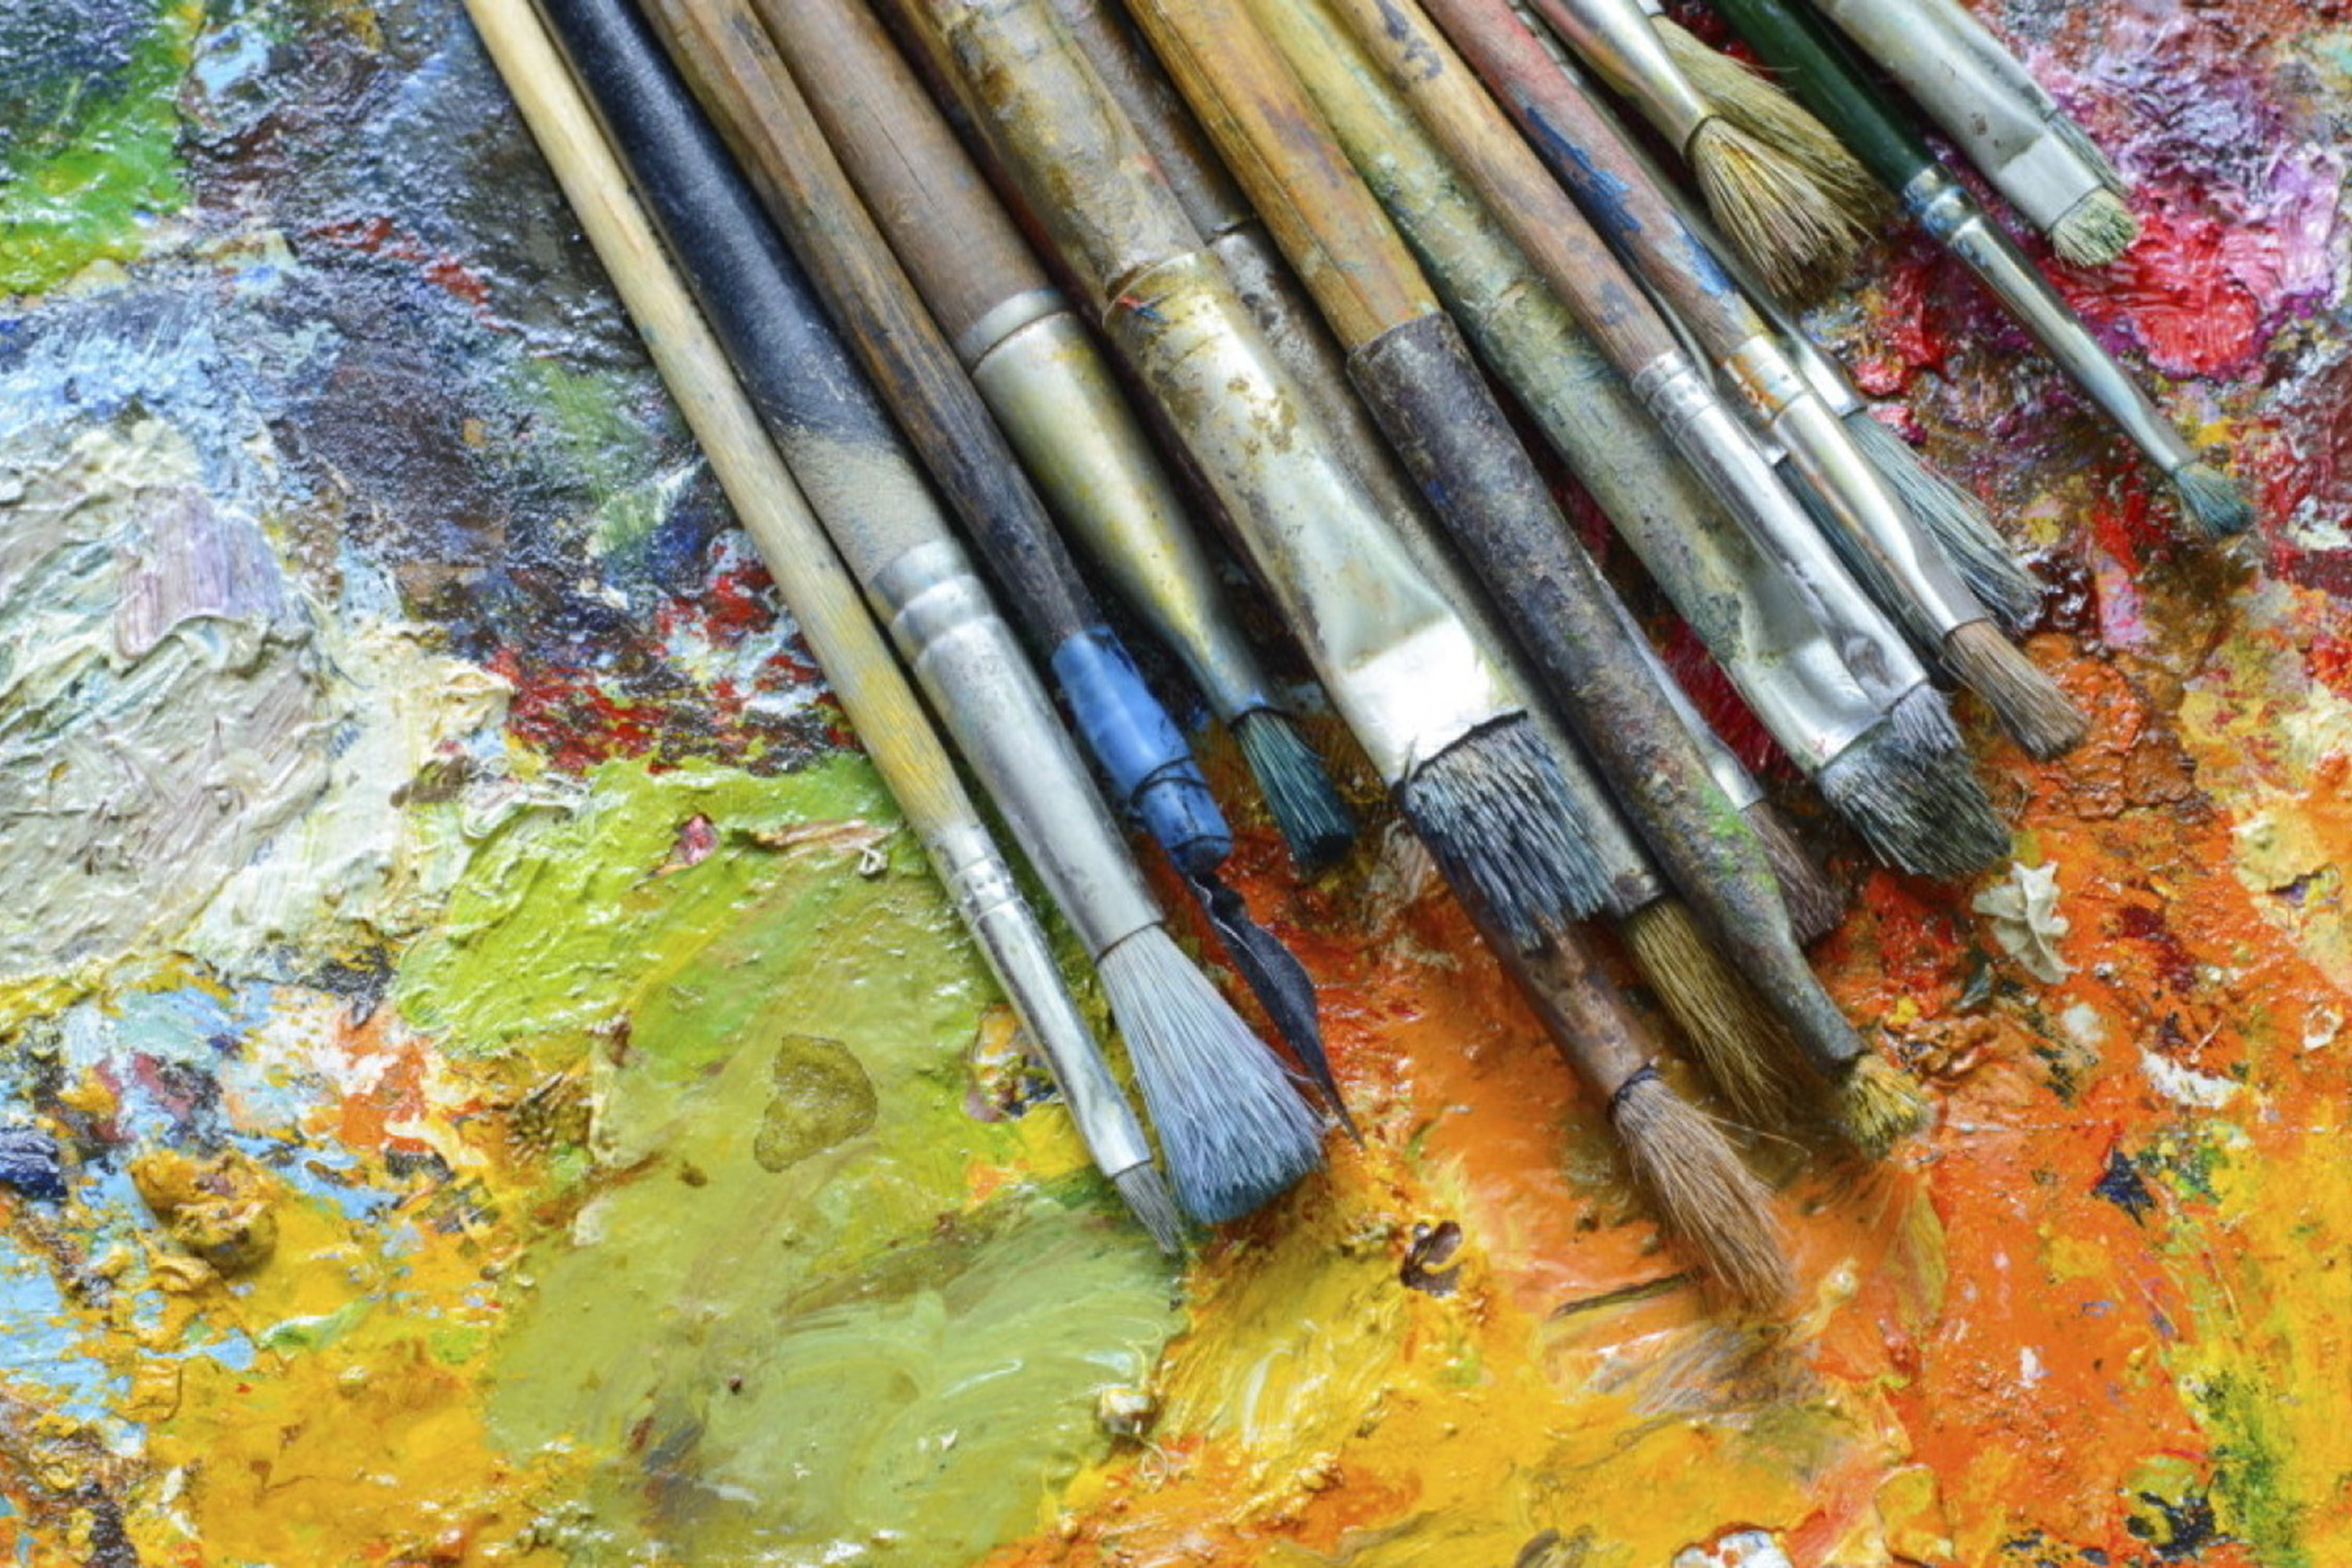  Artist travel workshops supply brushes and other materials. Join Taylor Smith on one of her art workshops in France, Germany, Italy or Spain. 